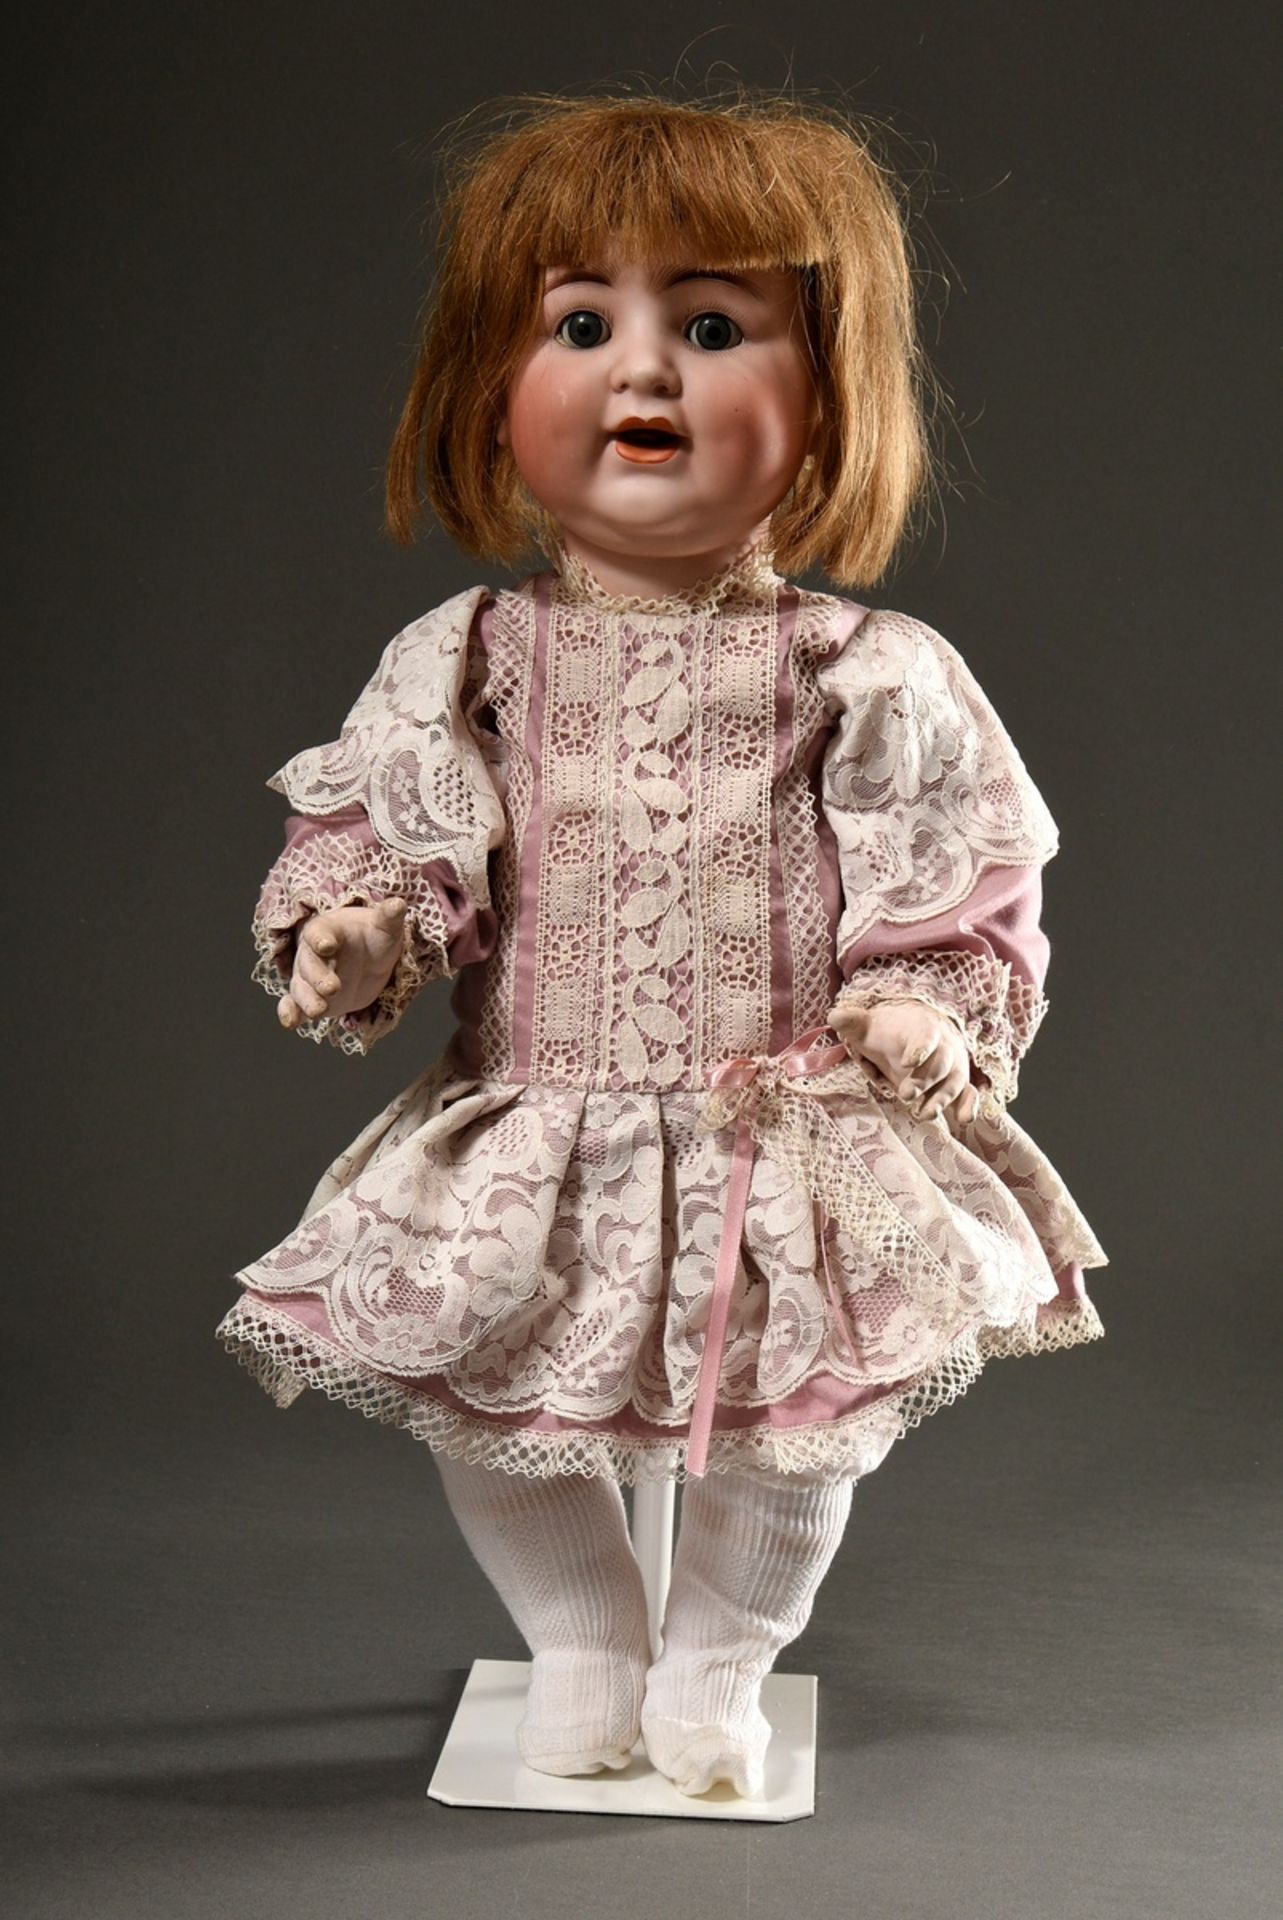 Old, Beck & Gottschalck doll with bisque porcelain crank head, blue sleeping eyes, open mouth with